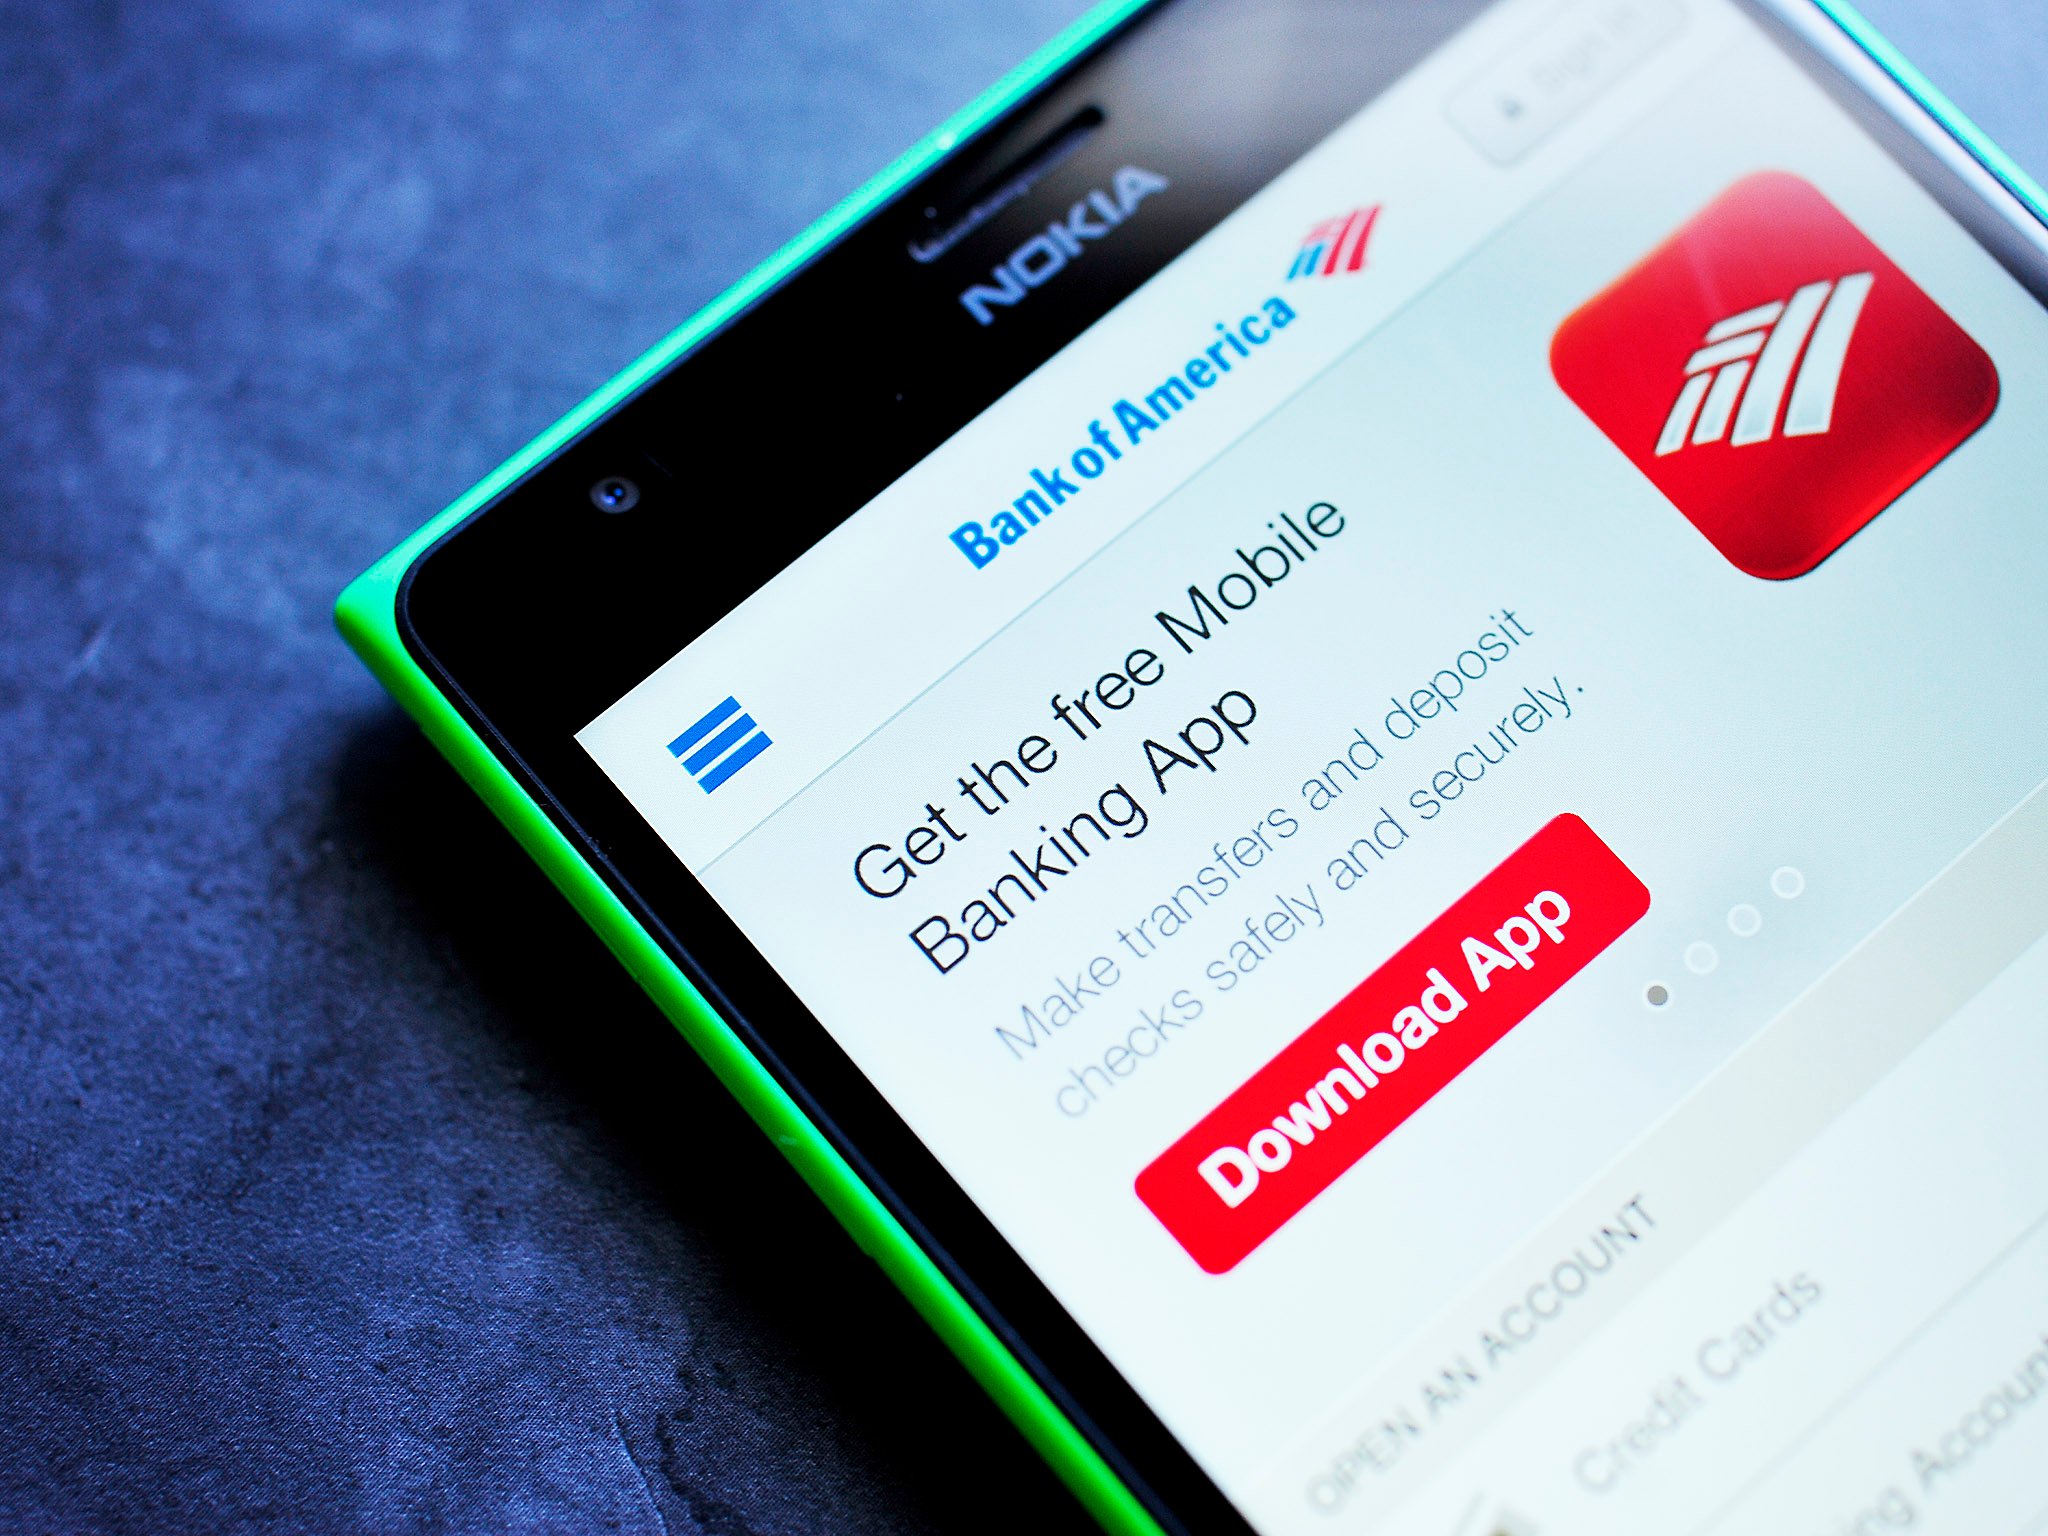 Bank of America ends support for its Windows Phone and Windows apps